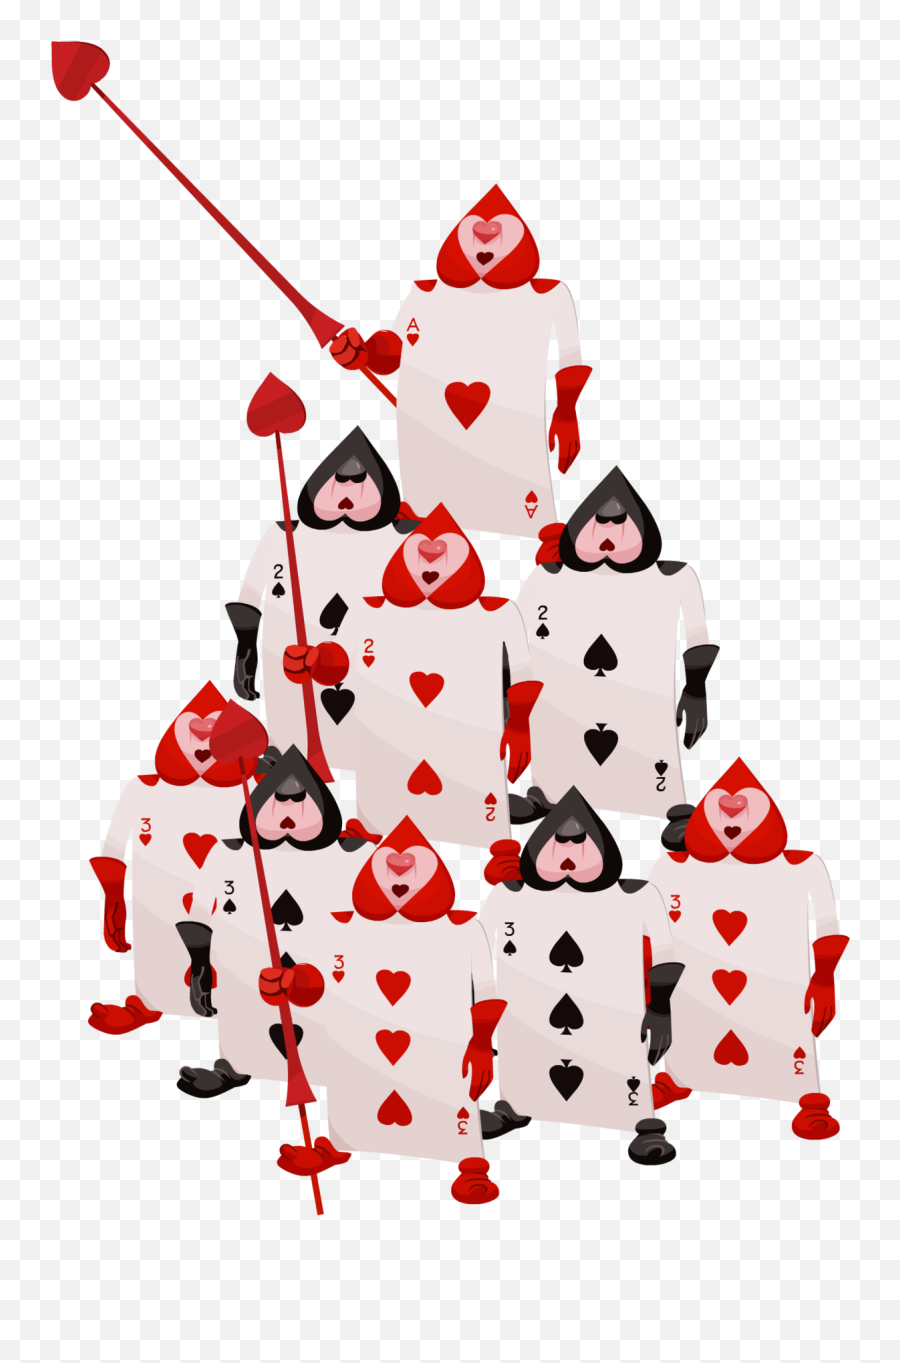 Playing Cards - Kingdom Hearts Wiki The Kingdom Hearts Alice In Wonderland Card Soldiers Png,Deck Of Cards Png